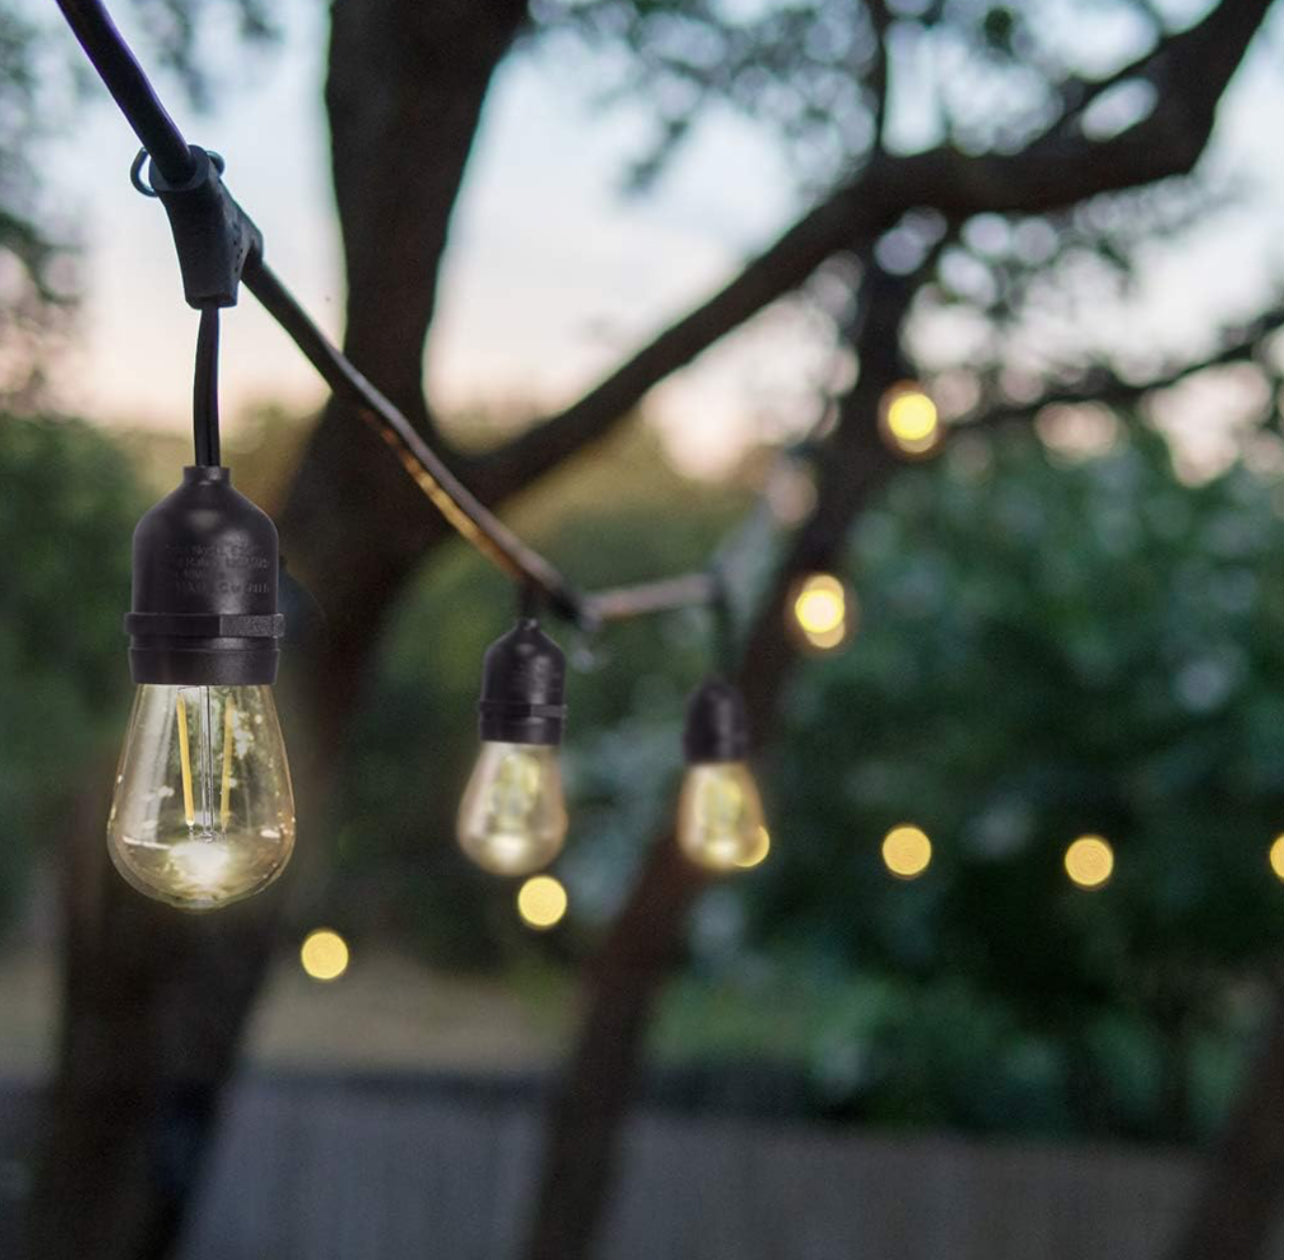 48 Ft Plug-In LED Outdoor String Lights Waterproof- Hanging, Dimmable 2W Vintage Edison Bulbs